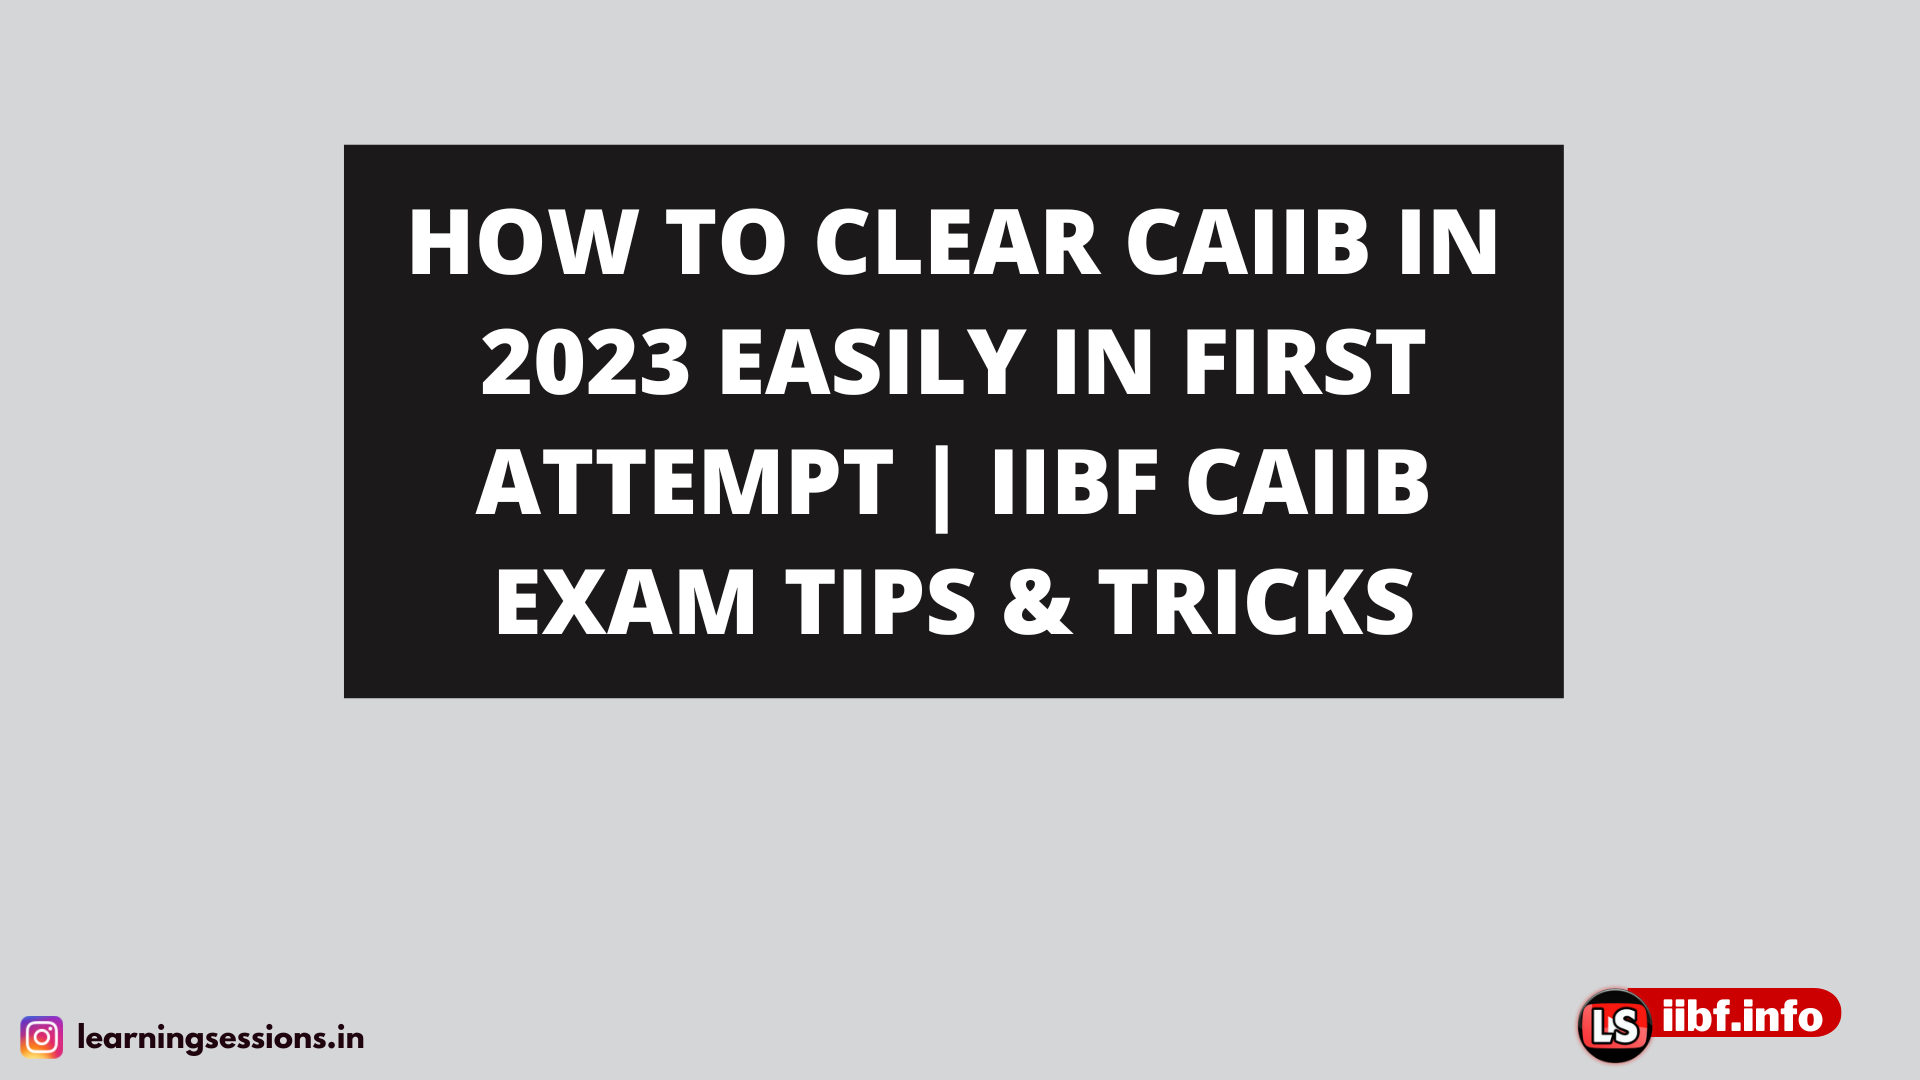 HOW TO CLEAR CAIIB IN 2023 EASILY IN FIRST ATTEMPT | IIBF CAIIB EXAM TIPS & TRICKS